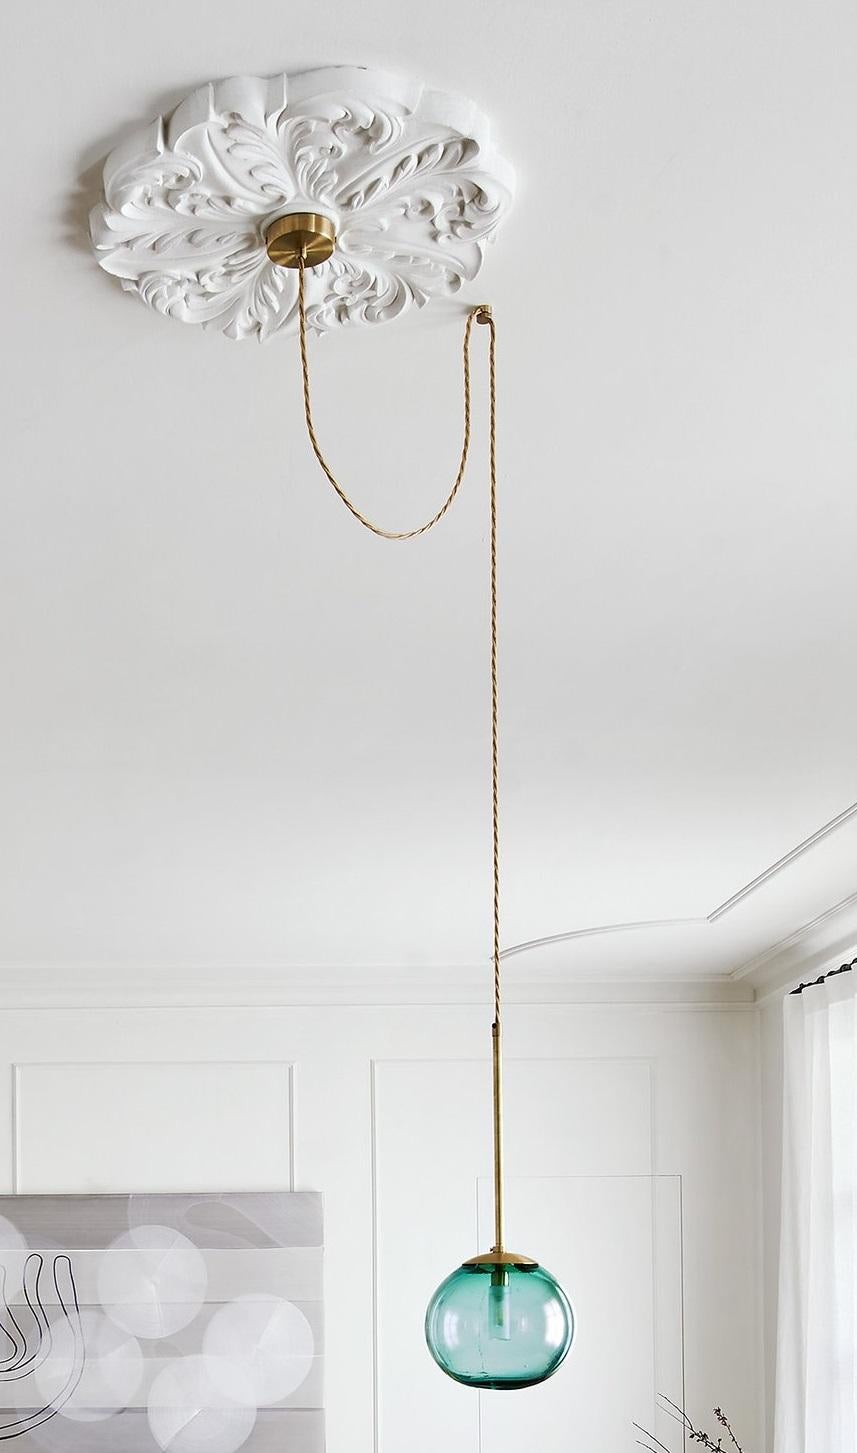 Pendant Ball Cable 18 by Contain
Dimensions: Ø 18 x H 100 cm (custom length).
Materials: Brass cable, 3D printed PLA structure and blown glass from local production.

Available in different finishes and dimensions. Please contact us. 

All our